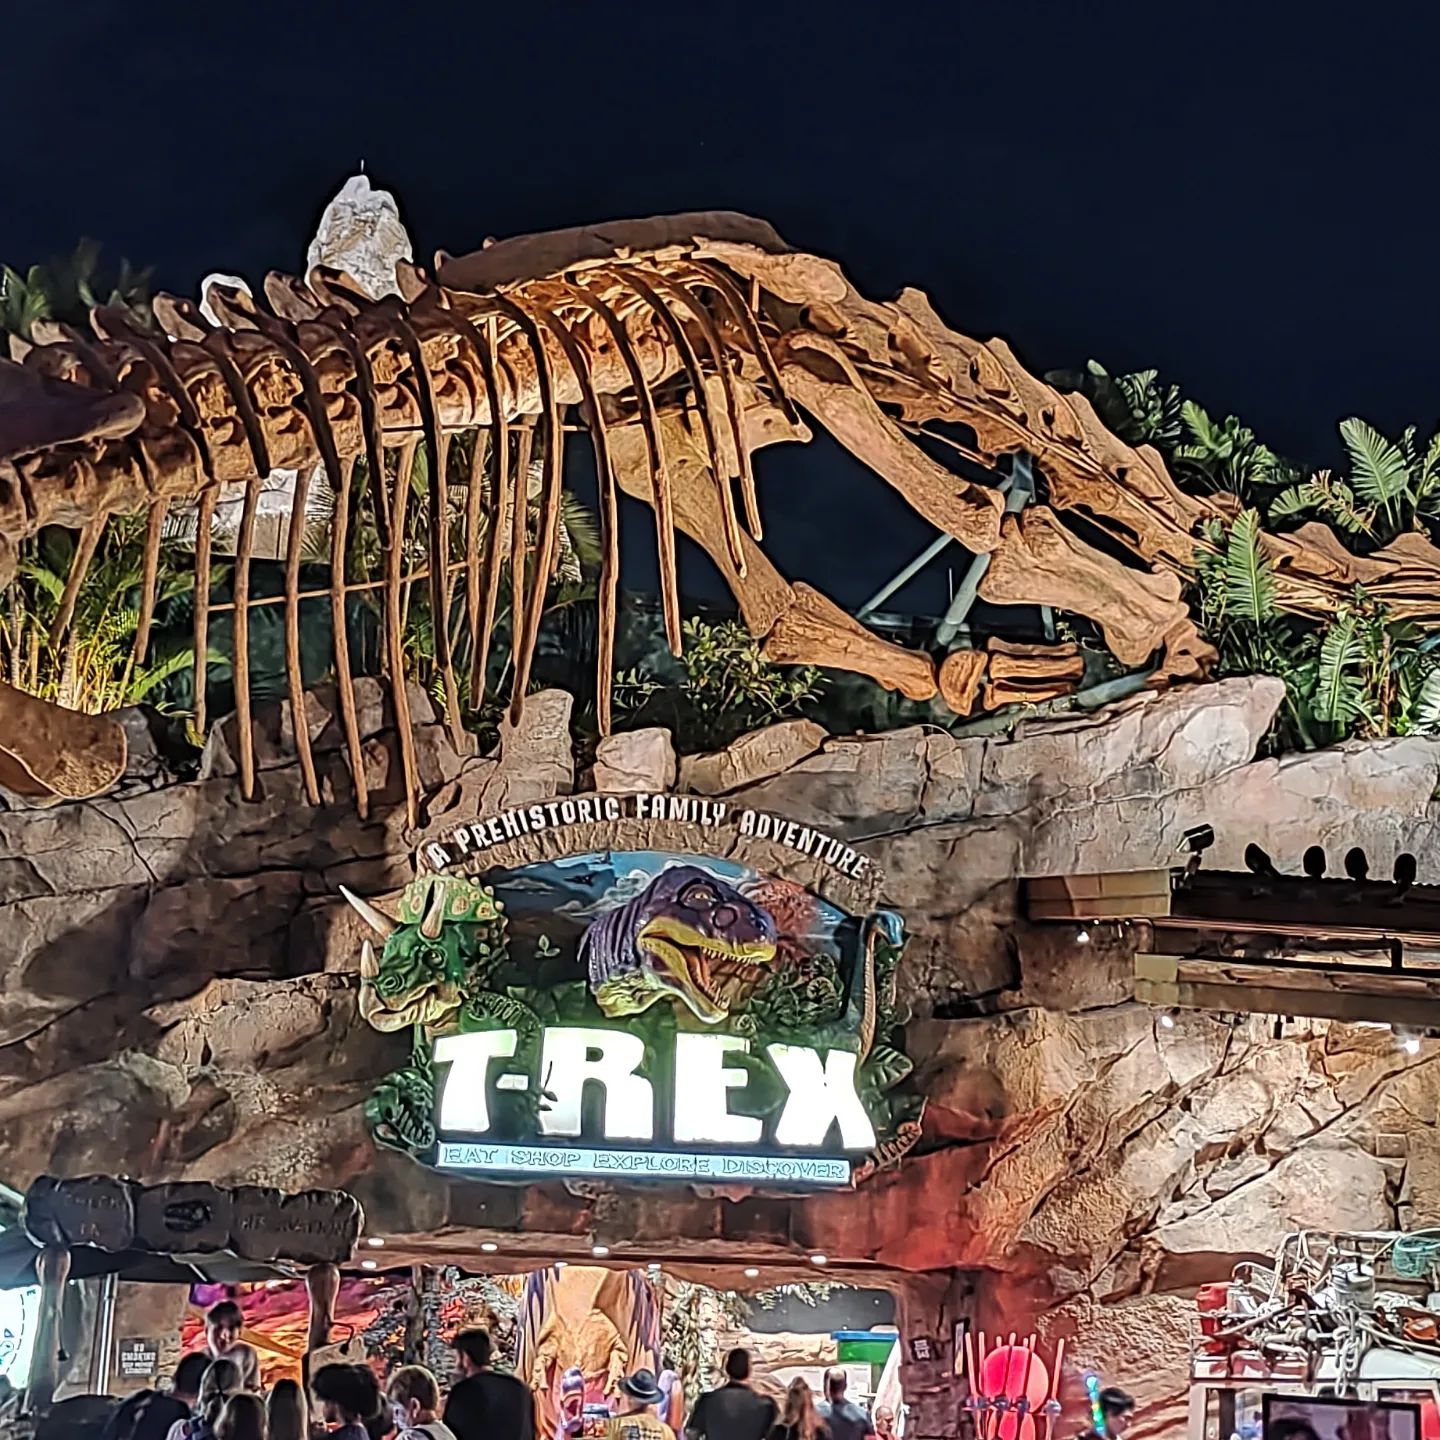 Entrance to the T-Rex Restaurant at Disney Springs